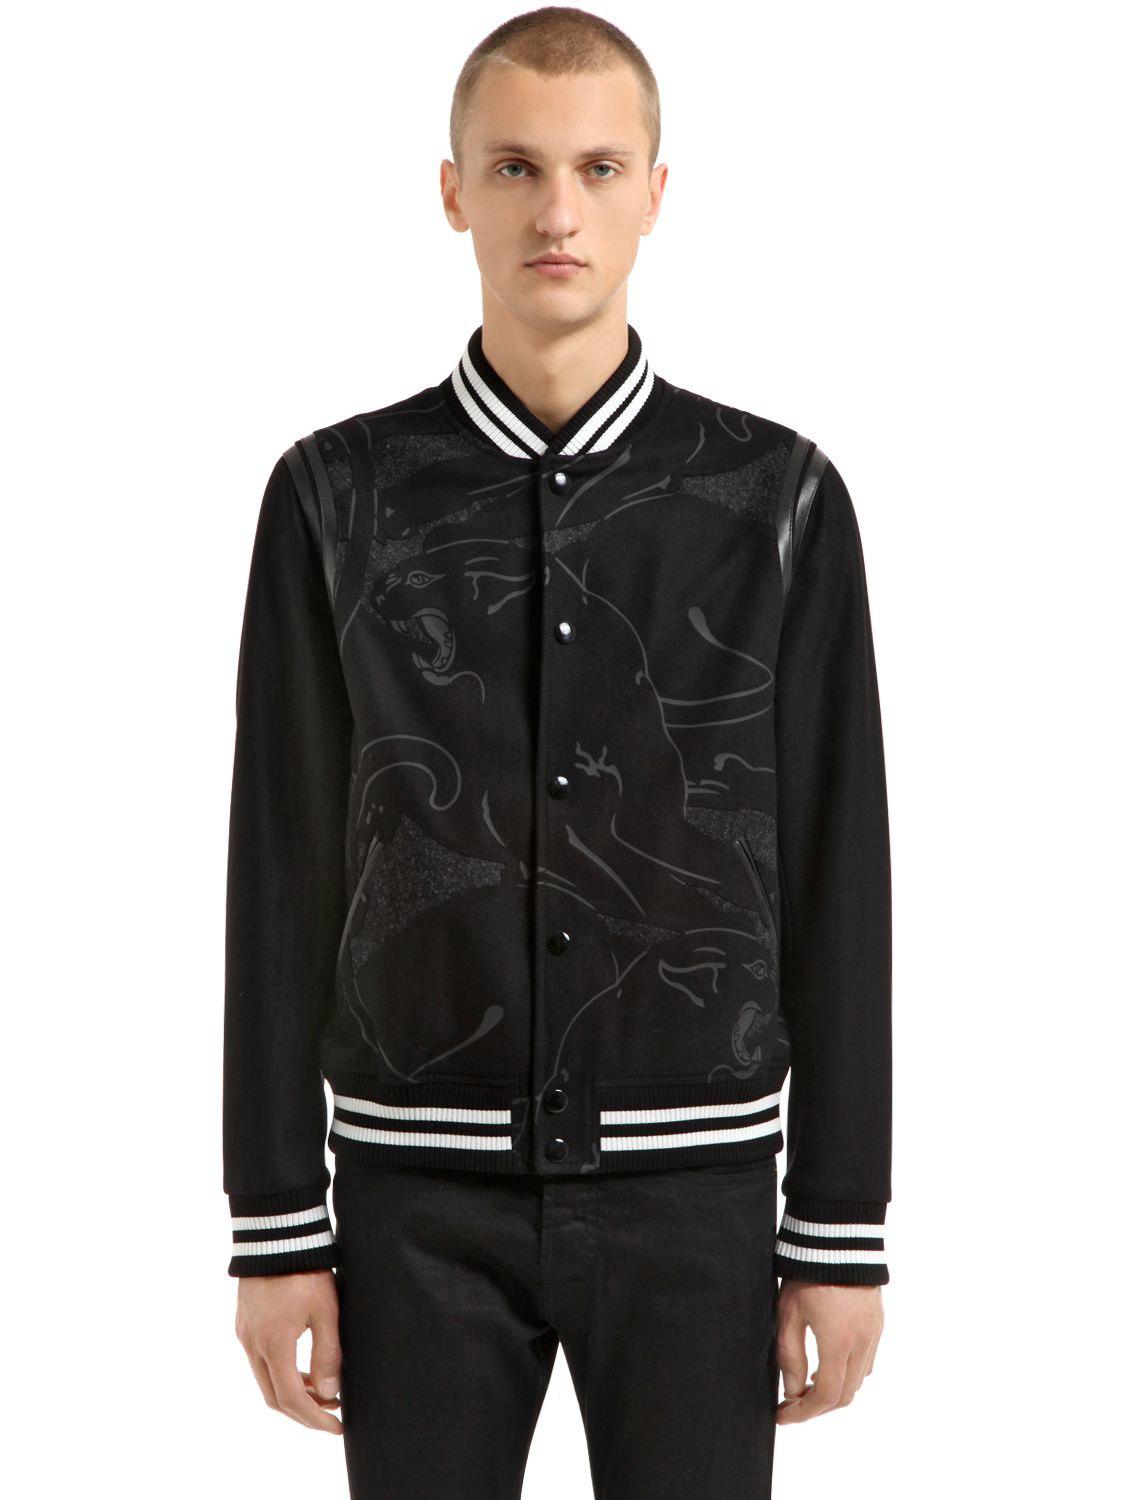 valentino panther leather wool varsity jacket - www.beststrollersreview.net...